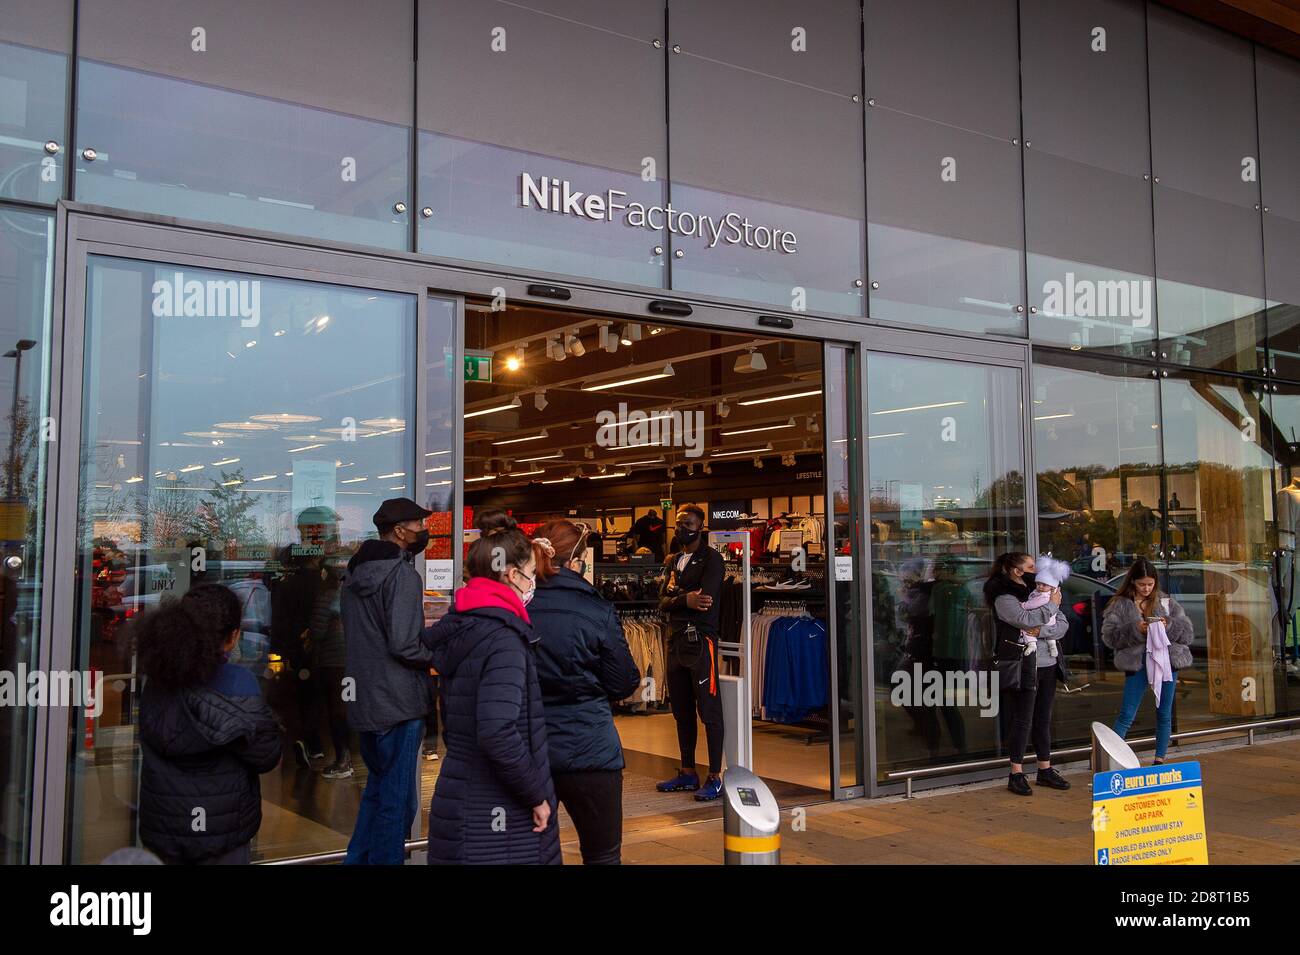 Taplow, Buckinghamshire, UK. 1st November, 2020. Shoppers queue to enter  the Nike Factory Shop. The car park at the Bishop Centre Retail Park in  Taplow, Buckinghamshire this morning was full. Shoppers were